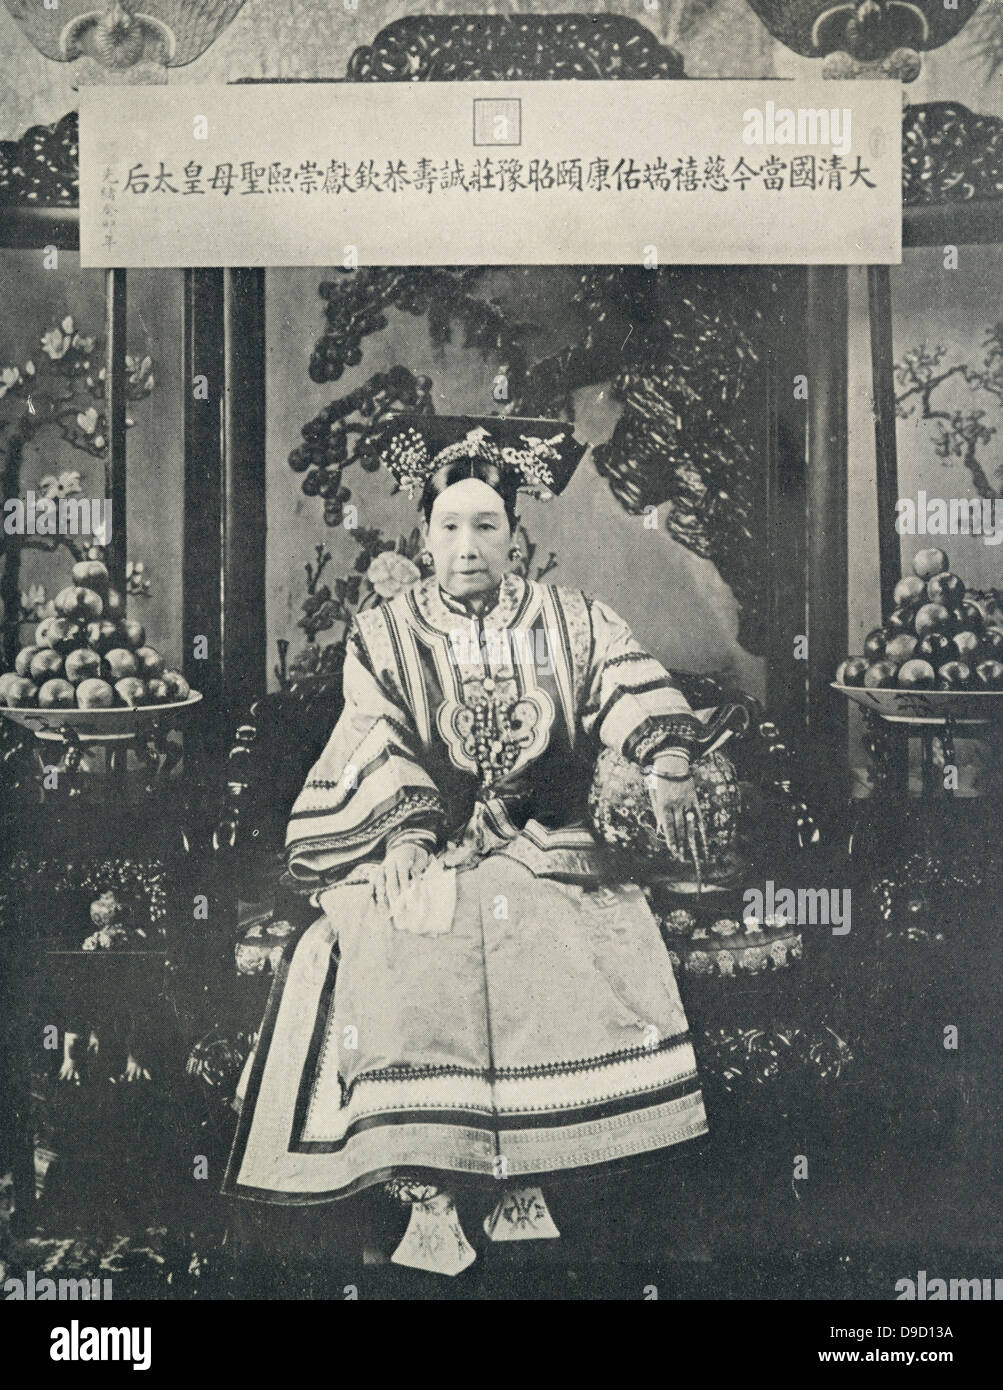 Empress Dowager Cixi;  Tzu-Hsi (1835-1908) Empress Dowager of the Manchu Yehenara clan who controlled Manchu Qing Dynasty of China from 1867 until her death. Supported anti-foreign Boxer Rising of 1900. Stock Photo